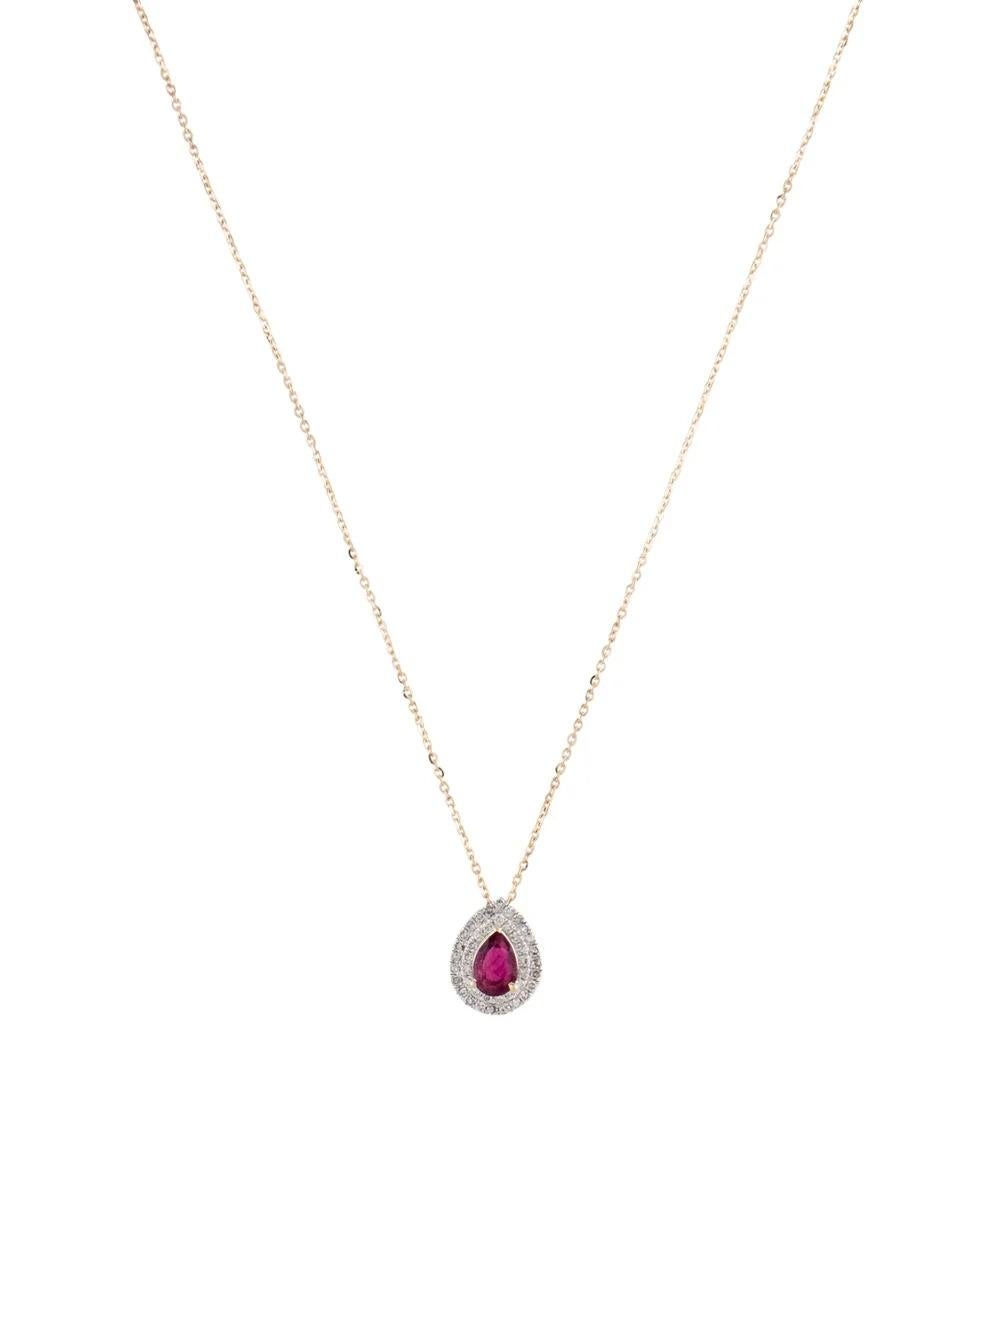 Indulge in timeless elegance with this stunning Rhodium-Plated & 14K Yellow Gold Pendant Necklace. Featuring a captivating Pear Modified Brilliant Tourmaline adorned with shimmering diamonds, this exquisite piece exudes luxury and